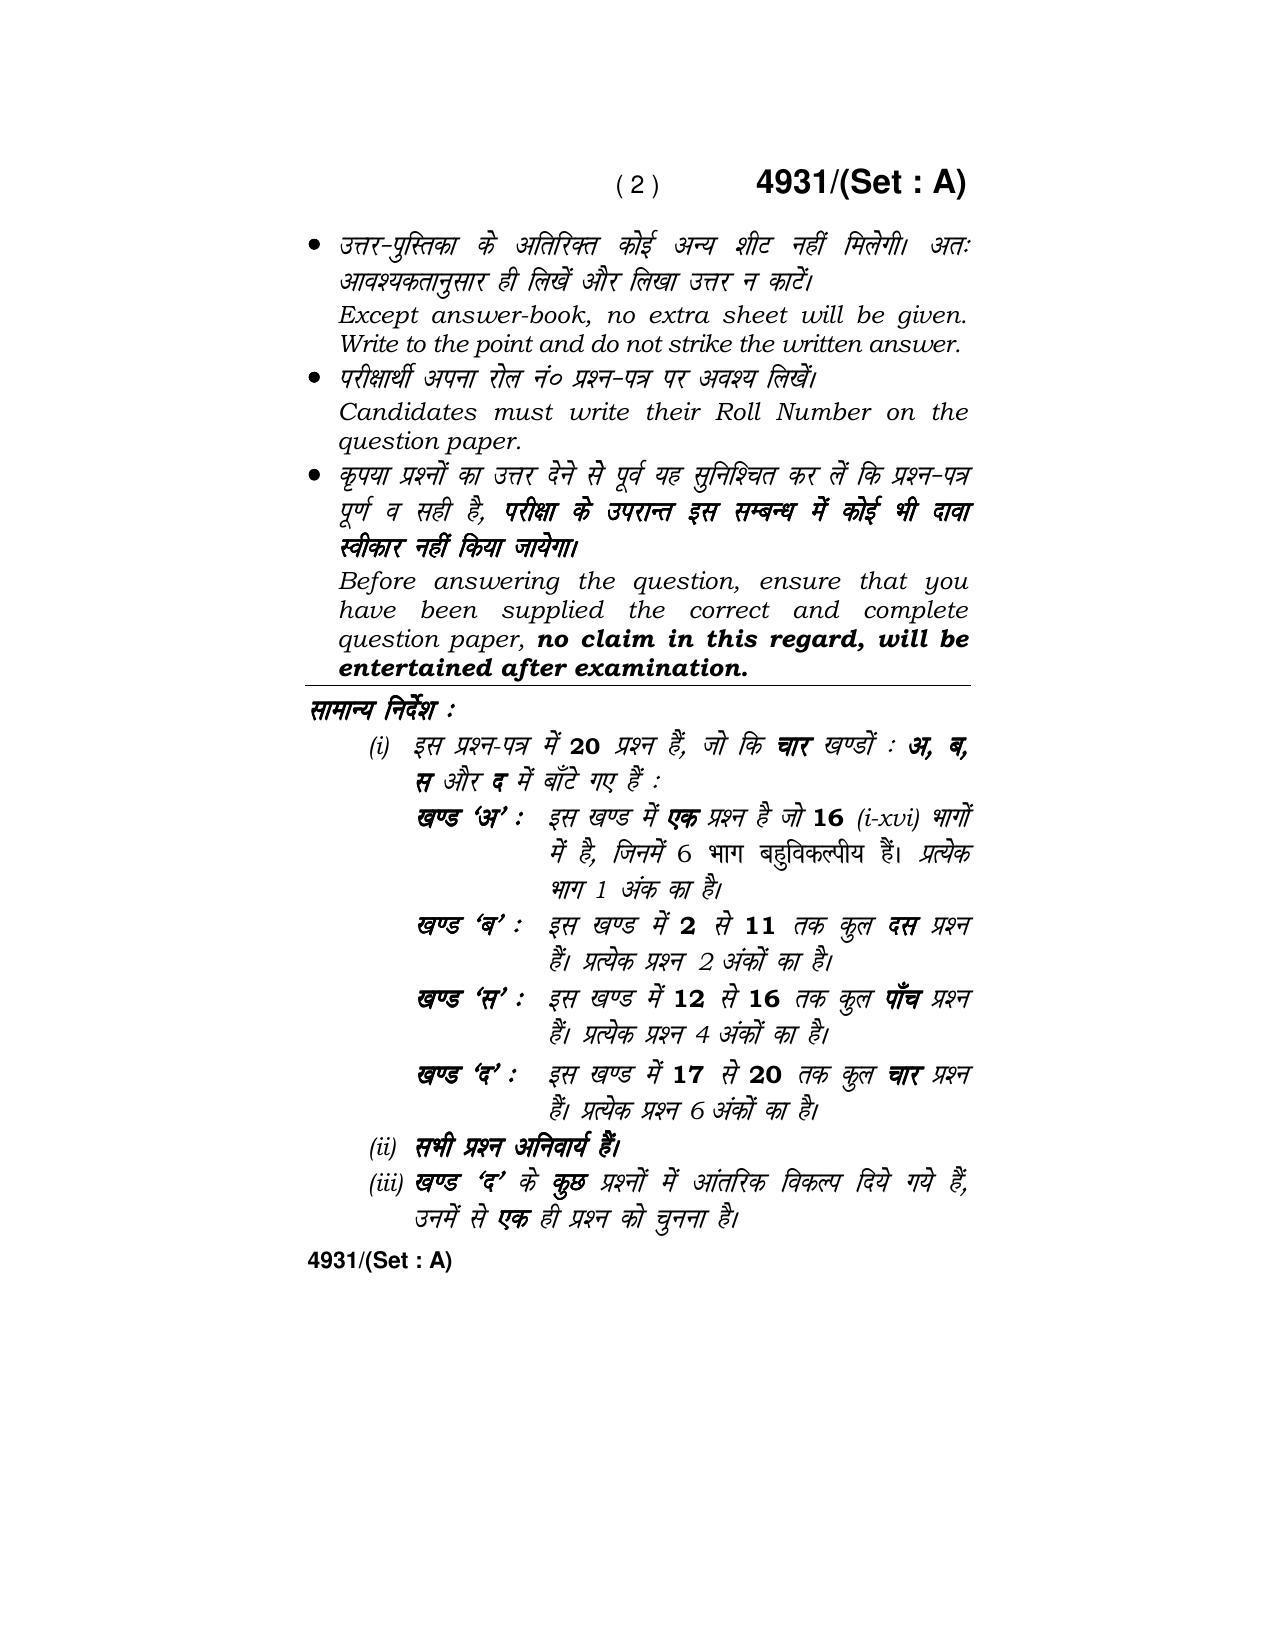 Haryana Board HBSE Class 12 Mathematics 2020 Question Paper - Page 2